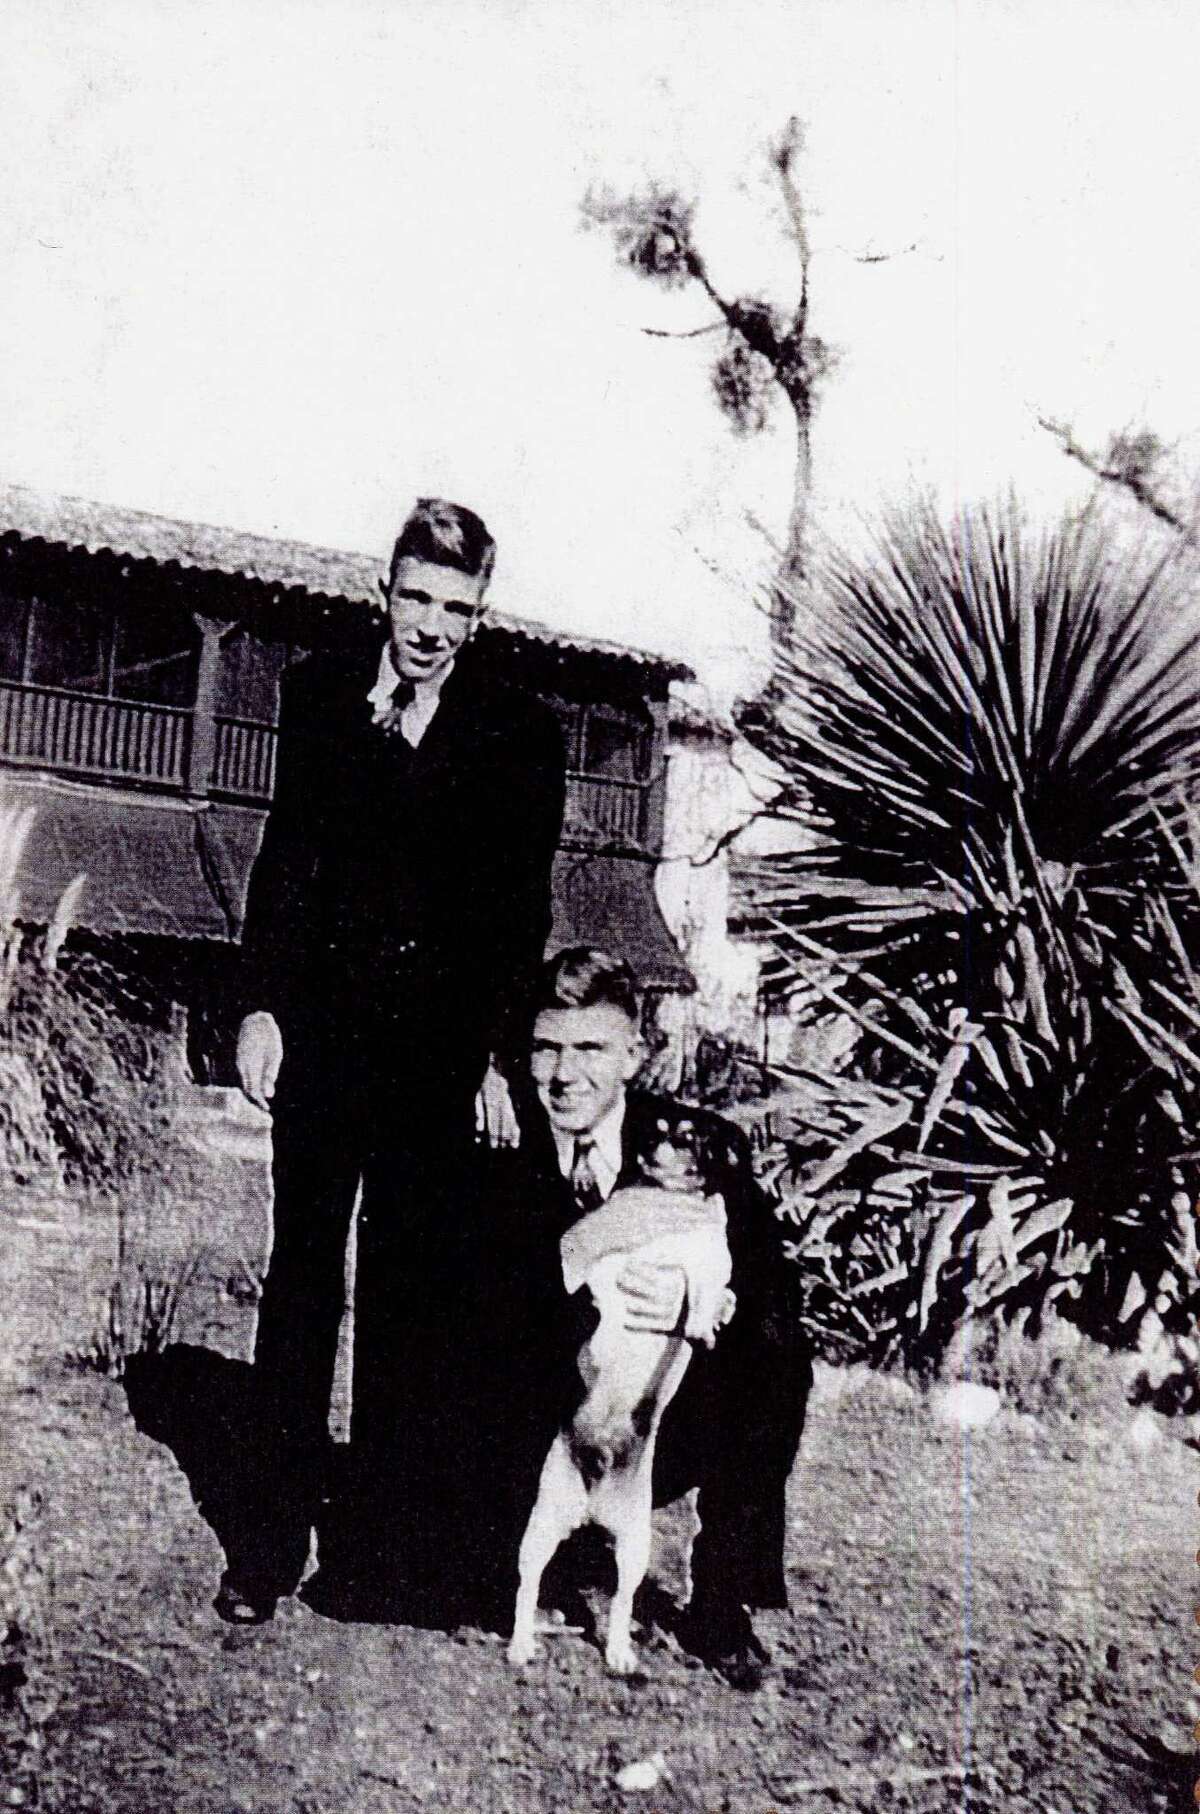 Twin brothers John “Jack” Onion, left, and James “Jim” Onion, shown here circa 1941 at about 17, grew up in the historic limestone house on Huebner Creek. Both became judges, like their father, John F. Onion Sr.